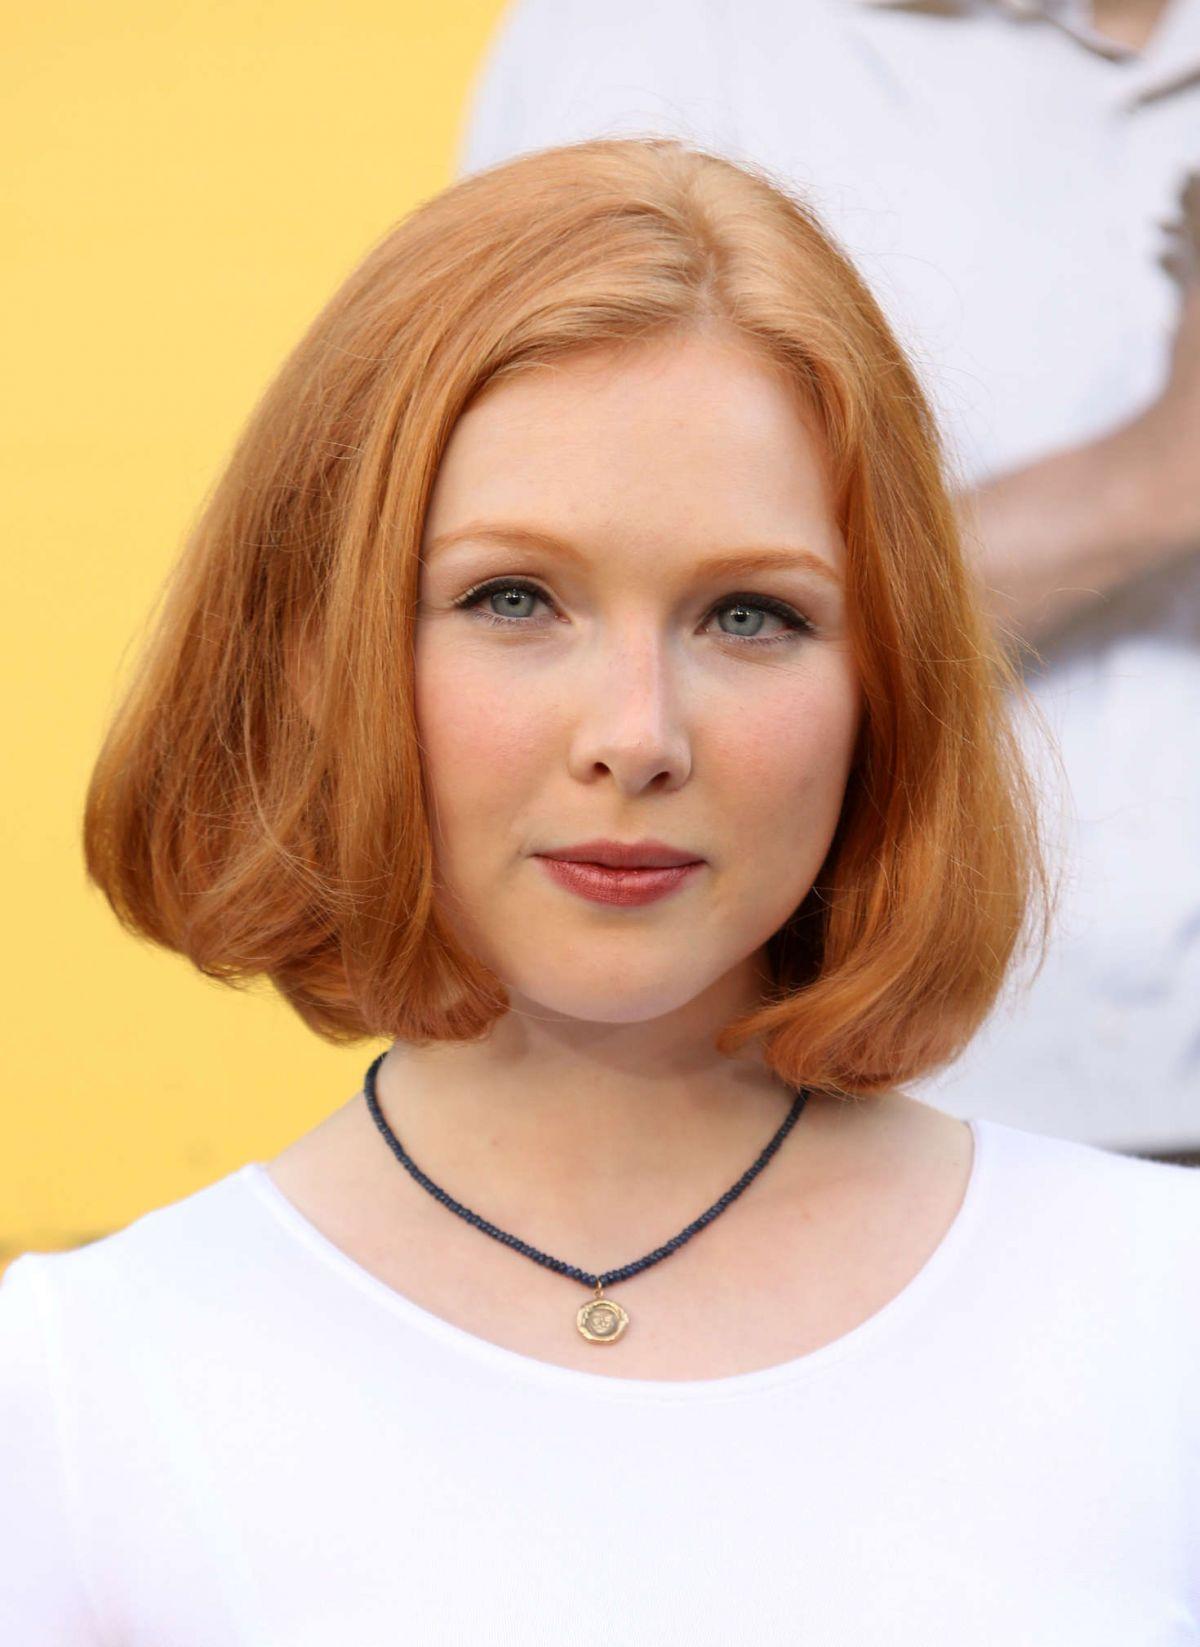 70+ Hot Pictures Of Molly C. Quinn Are God’s Gift For Her Die Hard Fans 148